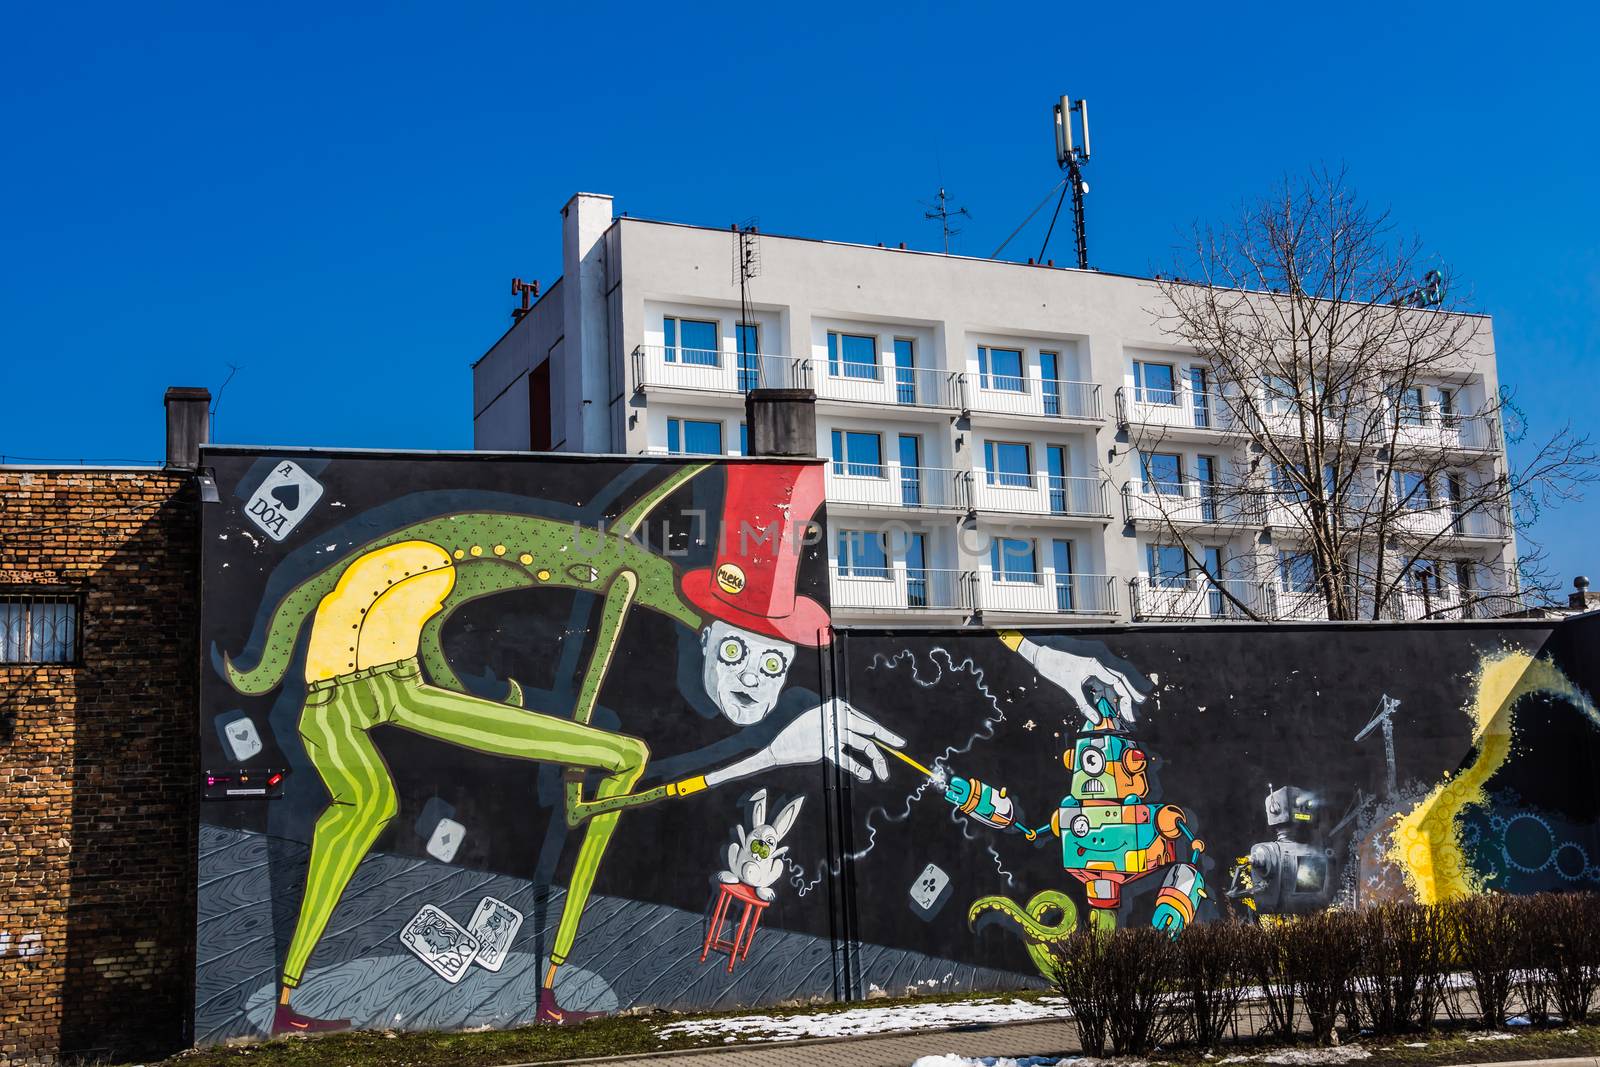 Mural by unidentified artist on April 08, 2013 in  Katowice. The city is the place of  annual Katowice Street Art Festival and is full of numerous interesting street-art pieces of art.